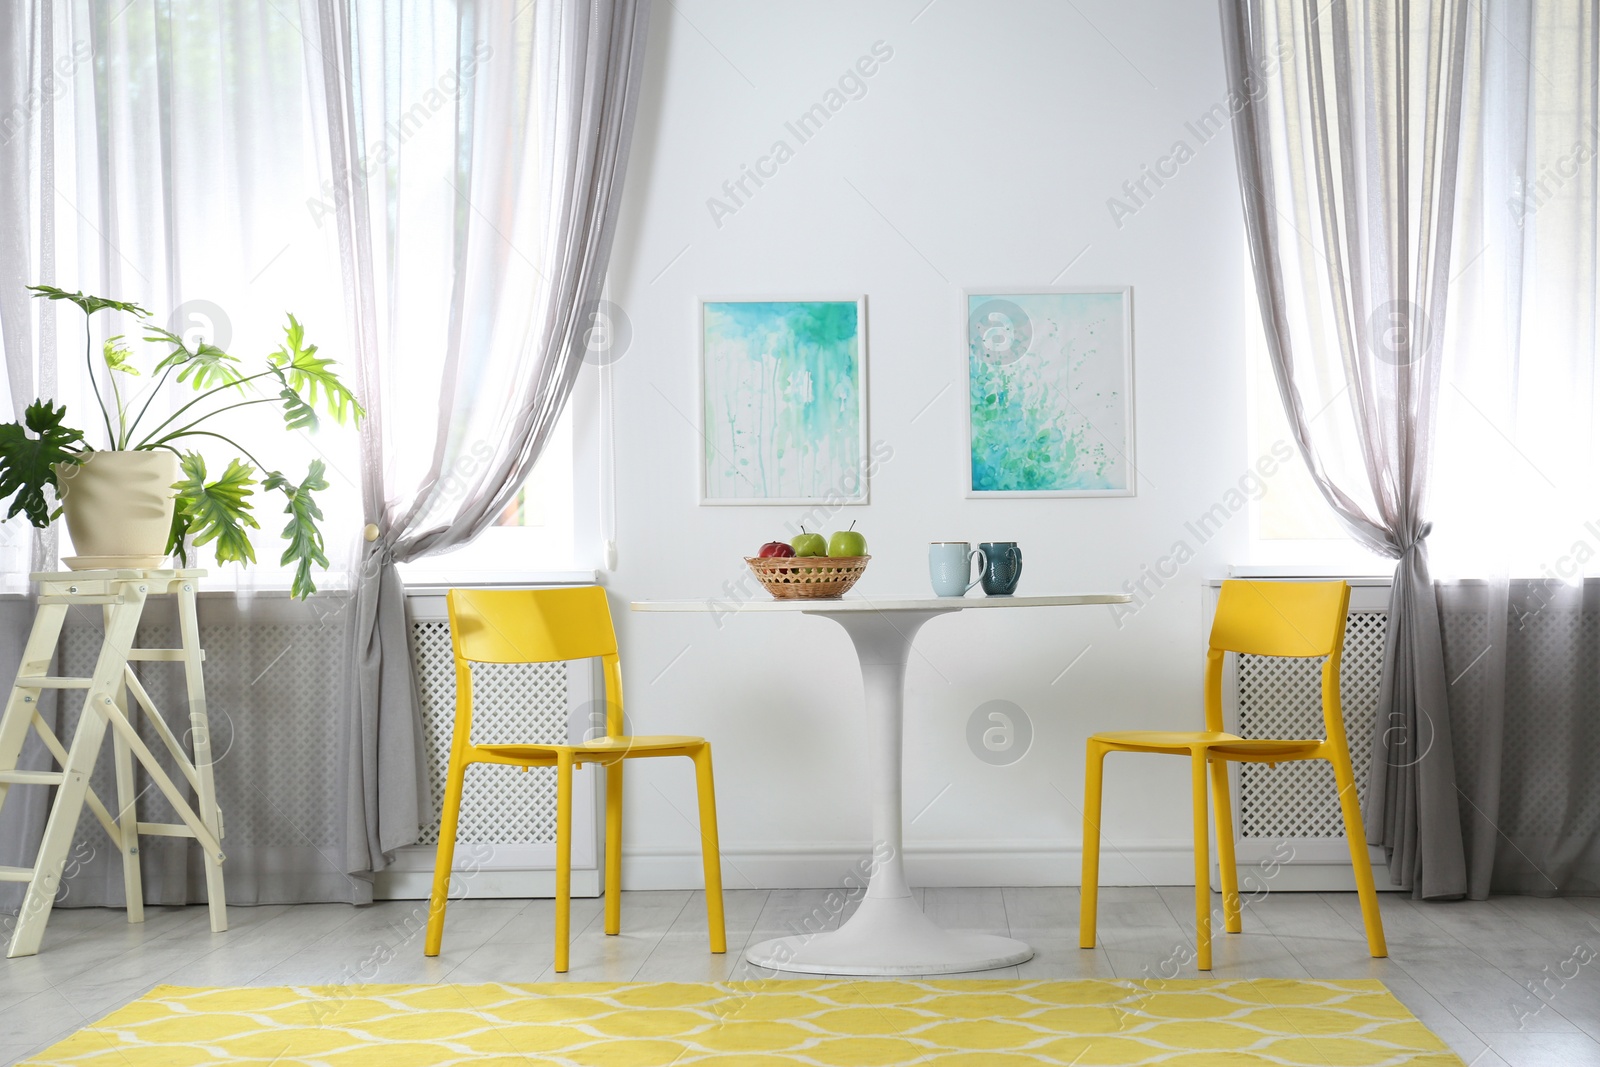 Photo of Room with comfortable table, chairs and stylish decor. Idea for interior design